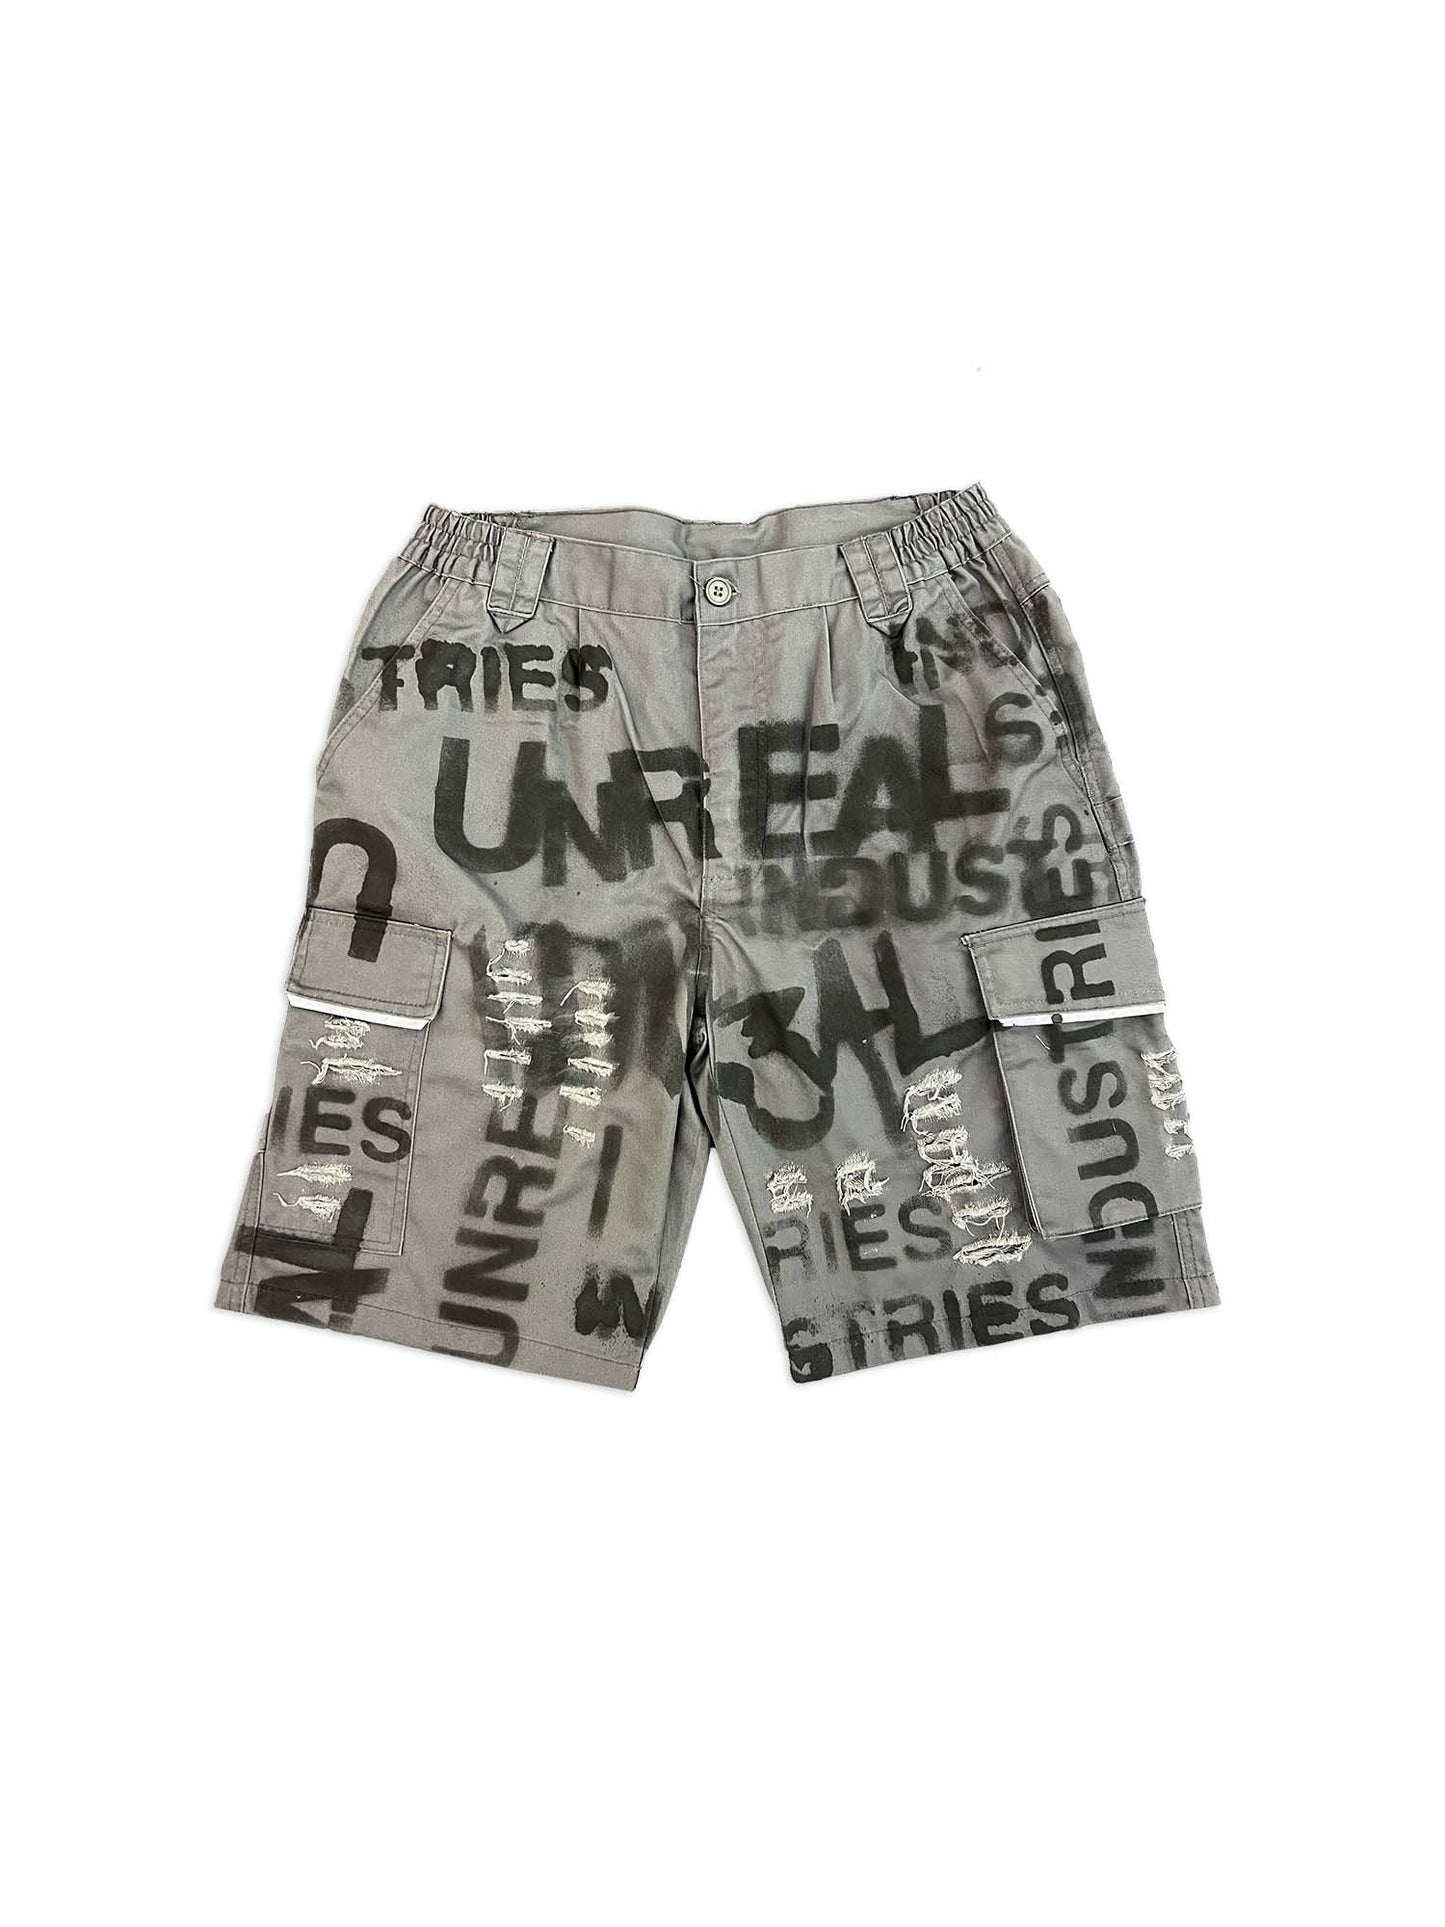 UNREAL custom premium Workwear/Streetwear product made with care! - [UNREAL]industries custom product